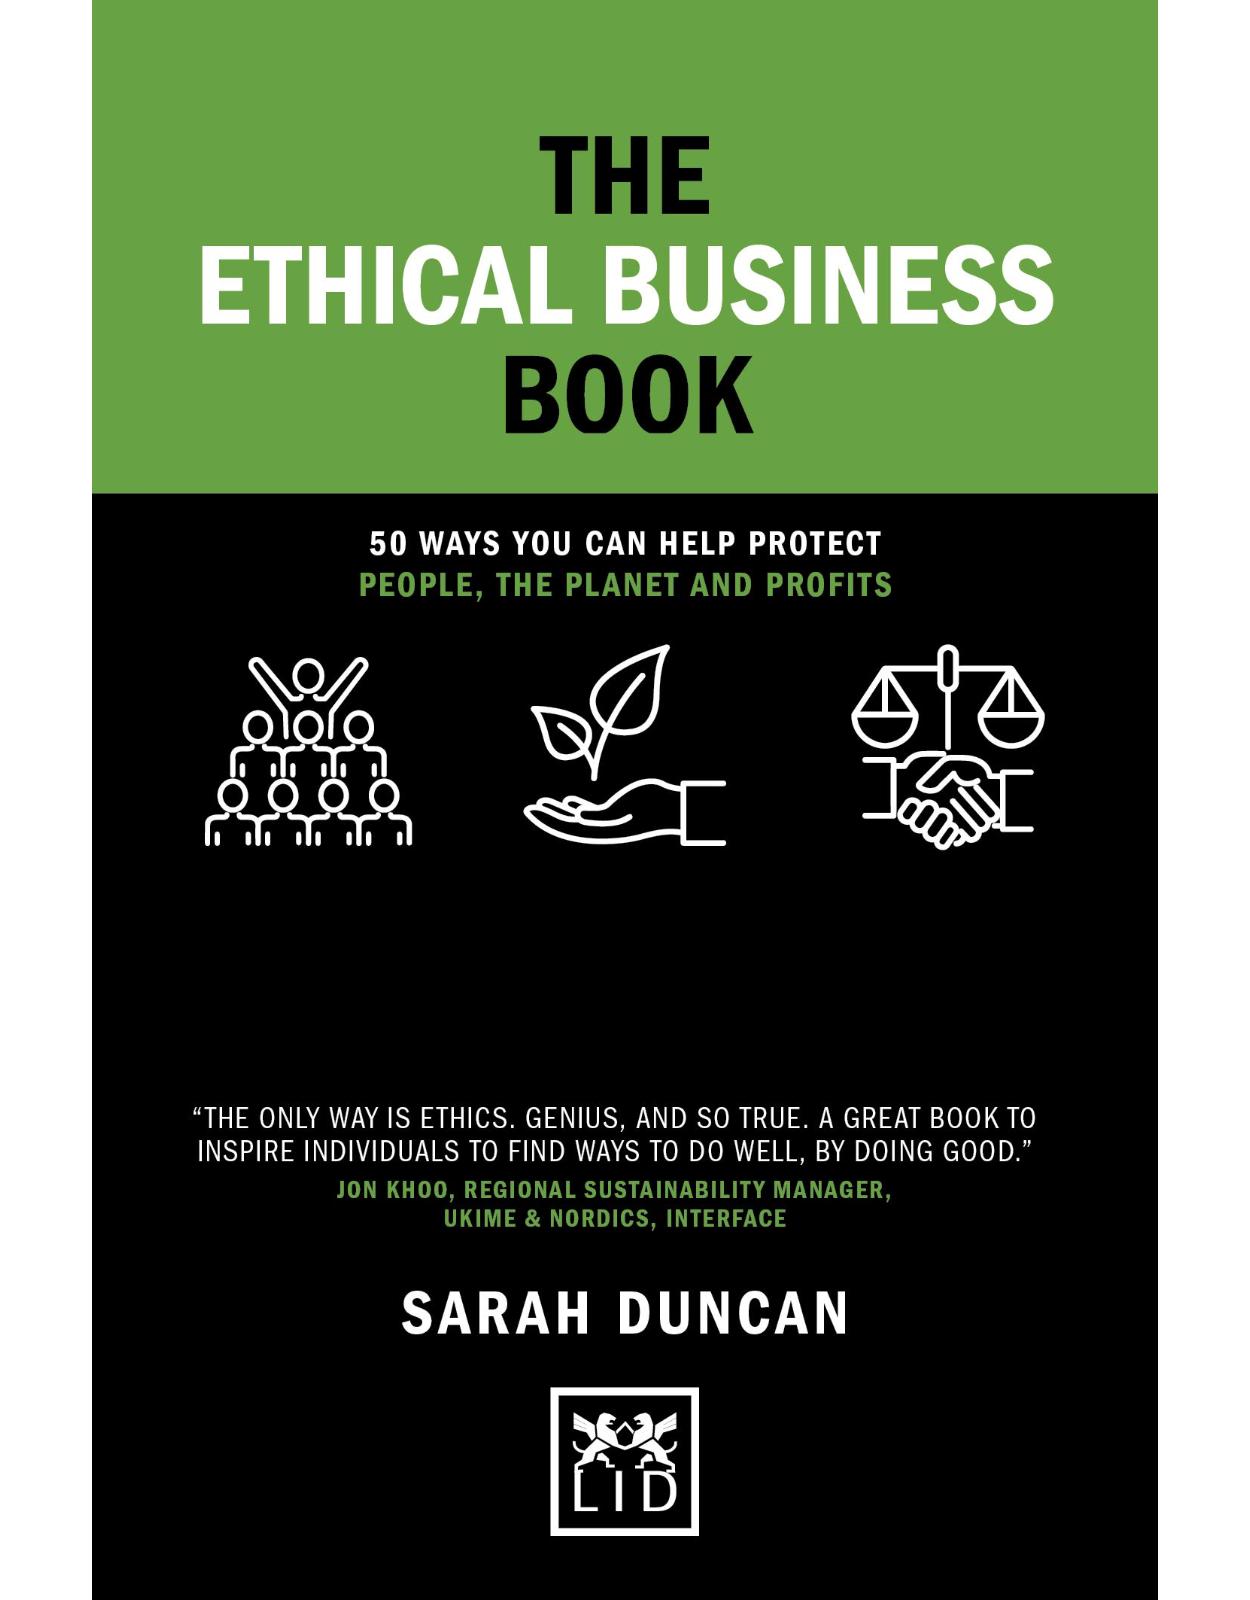 The Ethical Business Book (Concise Advice): 50 Ways You Can Help Protect People, The Planet And Profits